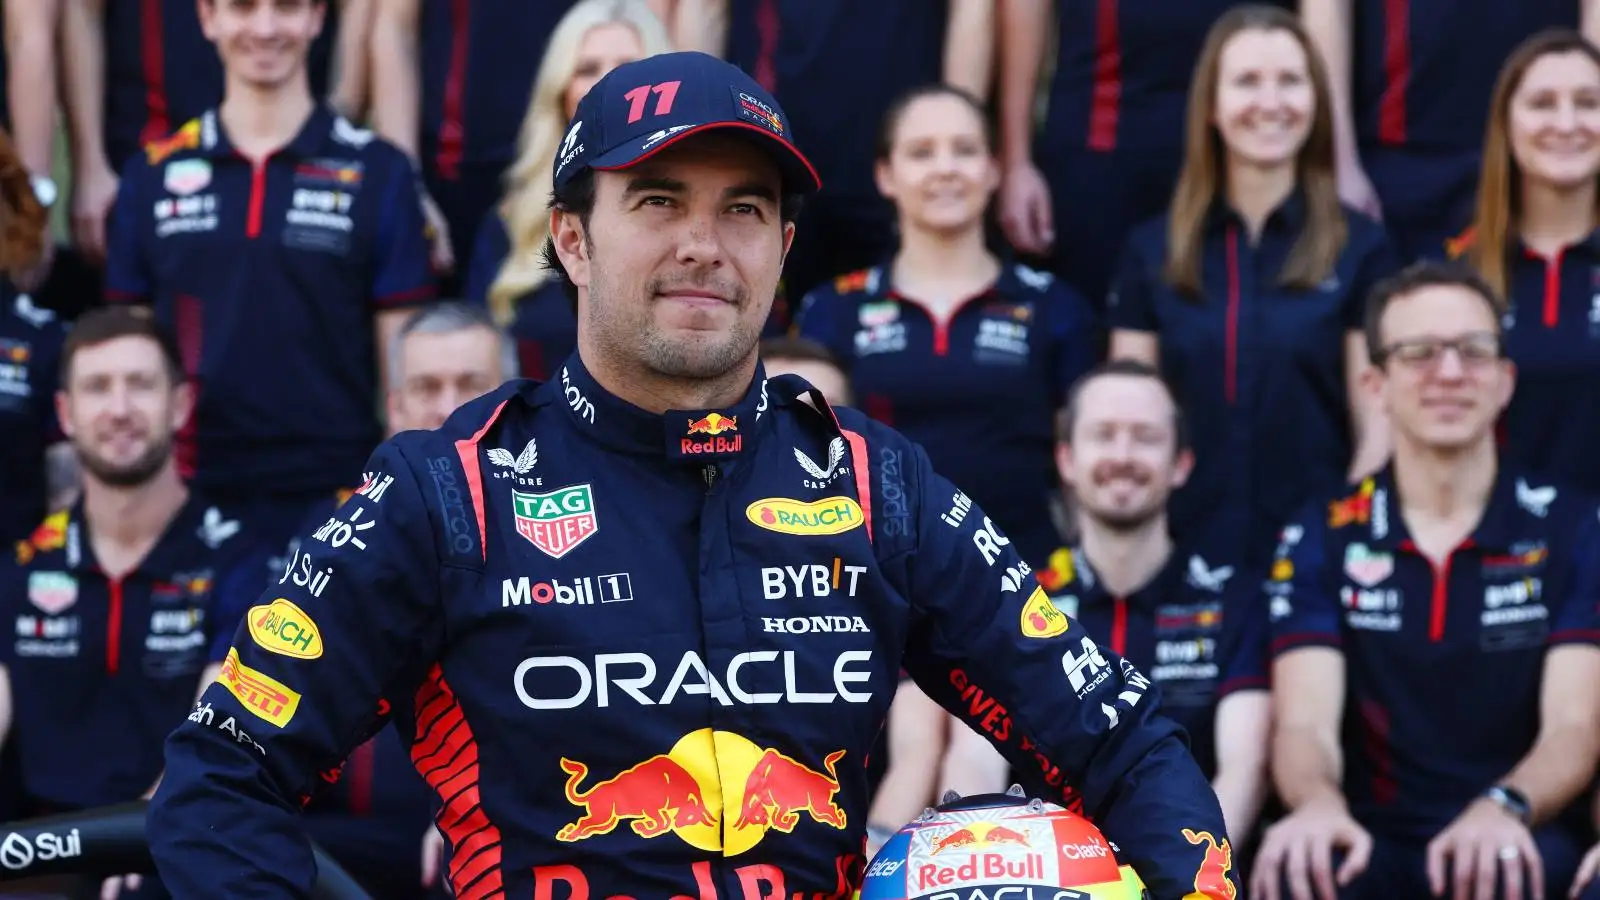 Sergio Perez posing for a Red Bull team photo in Abu Dhabi.